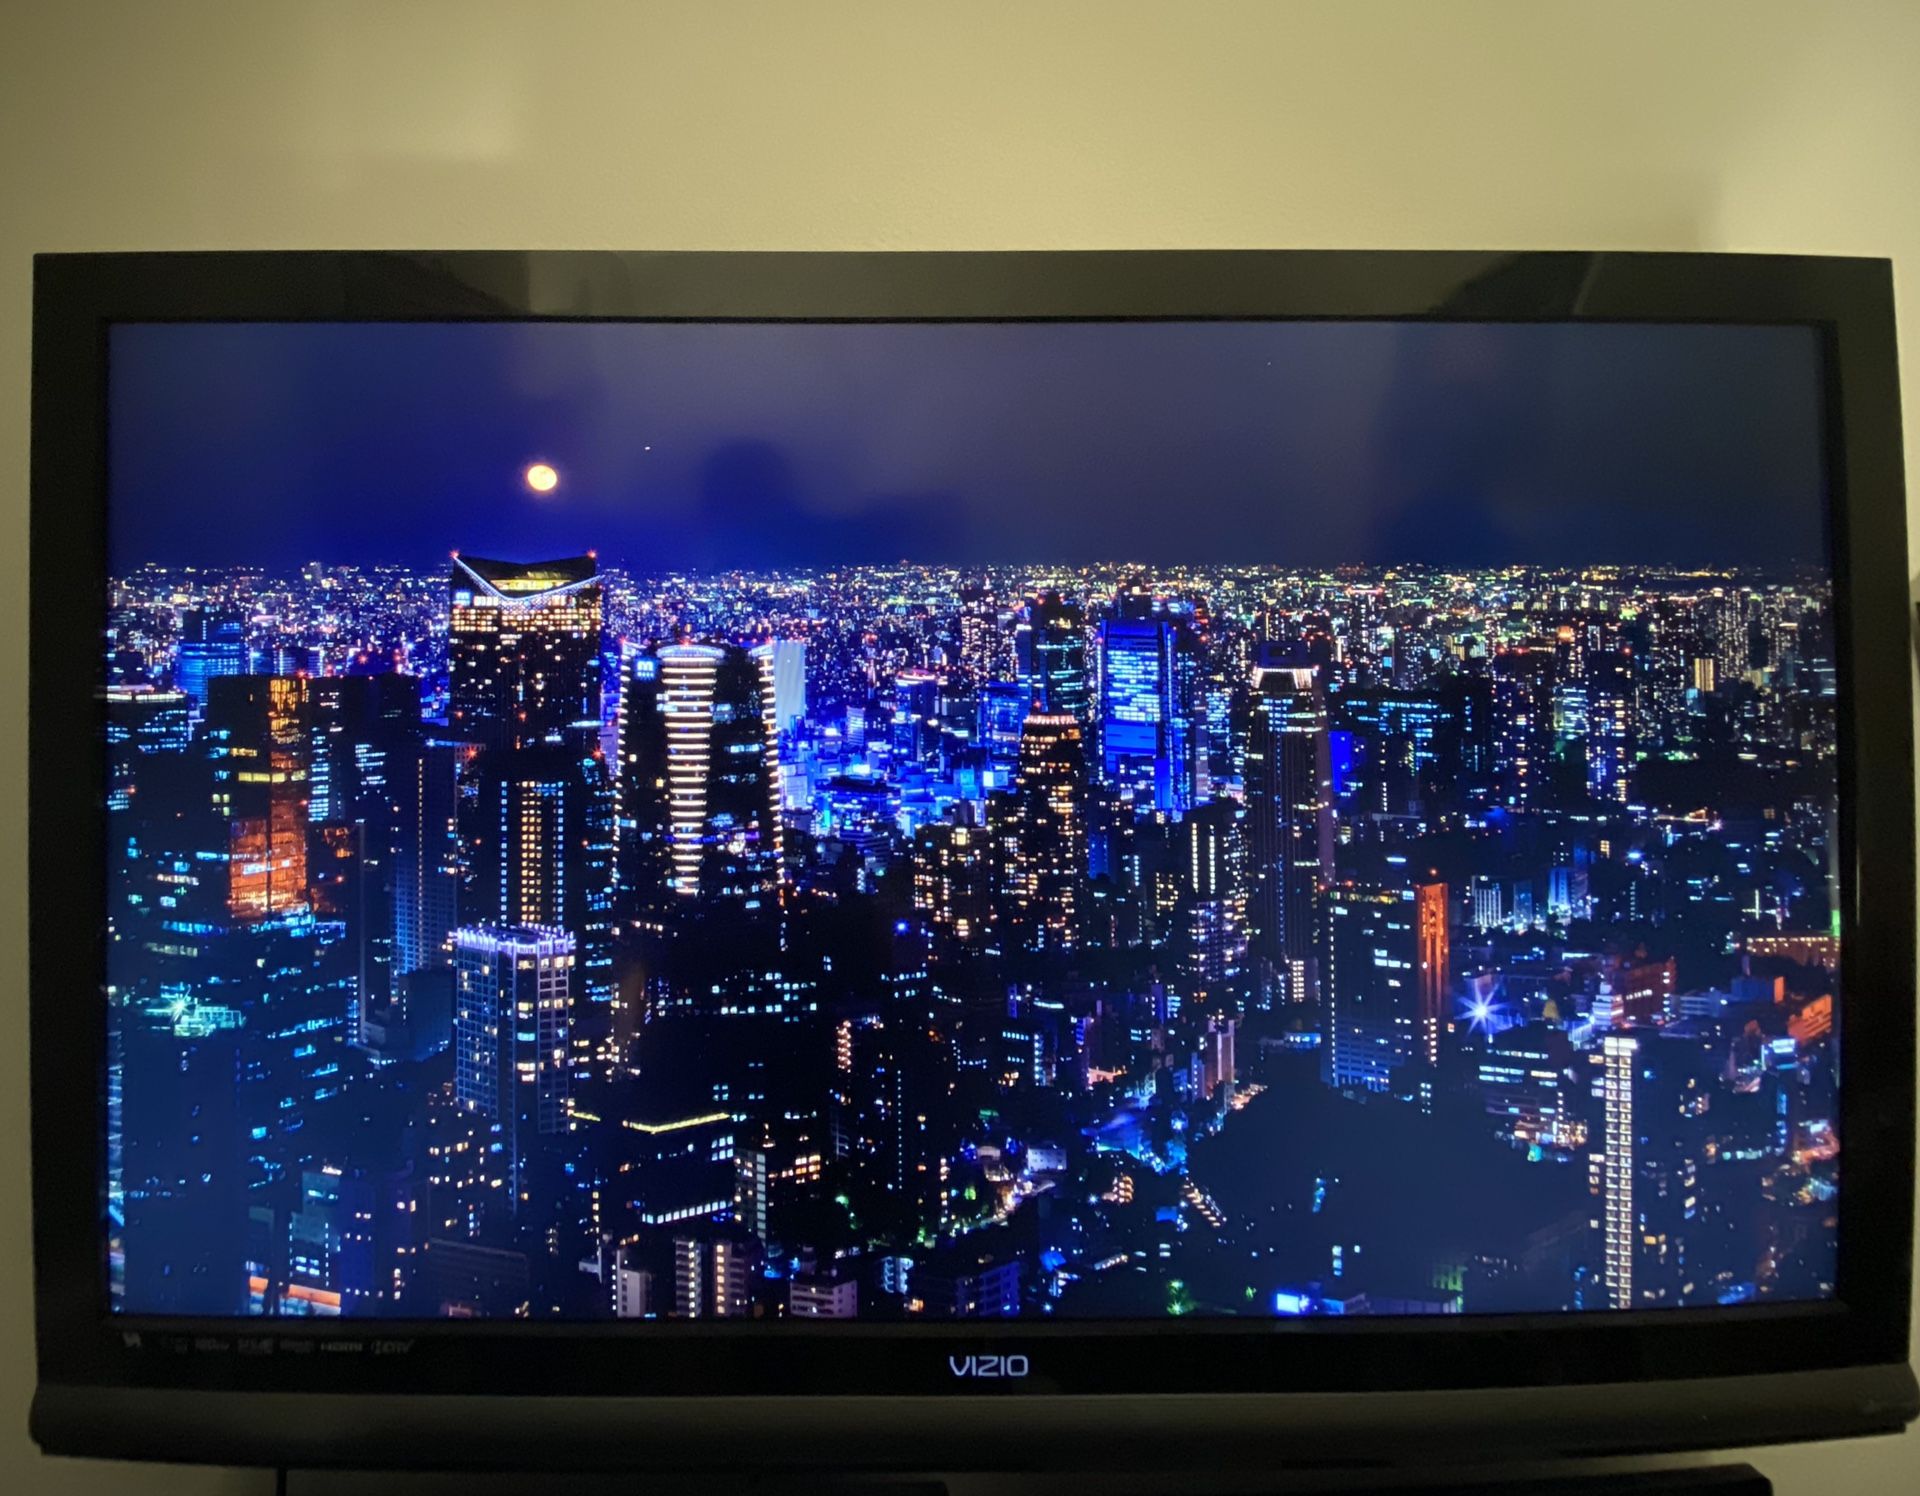 55” Vizio TV with wall mount